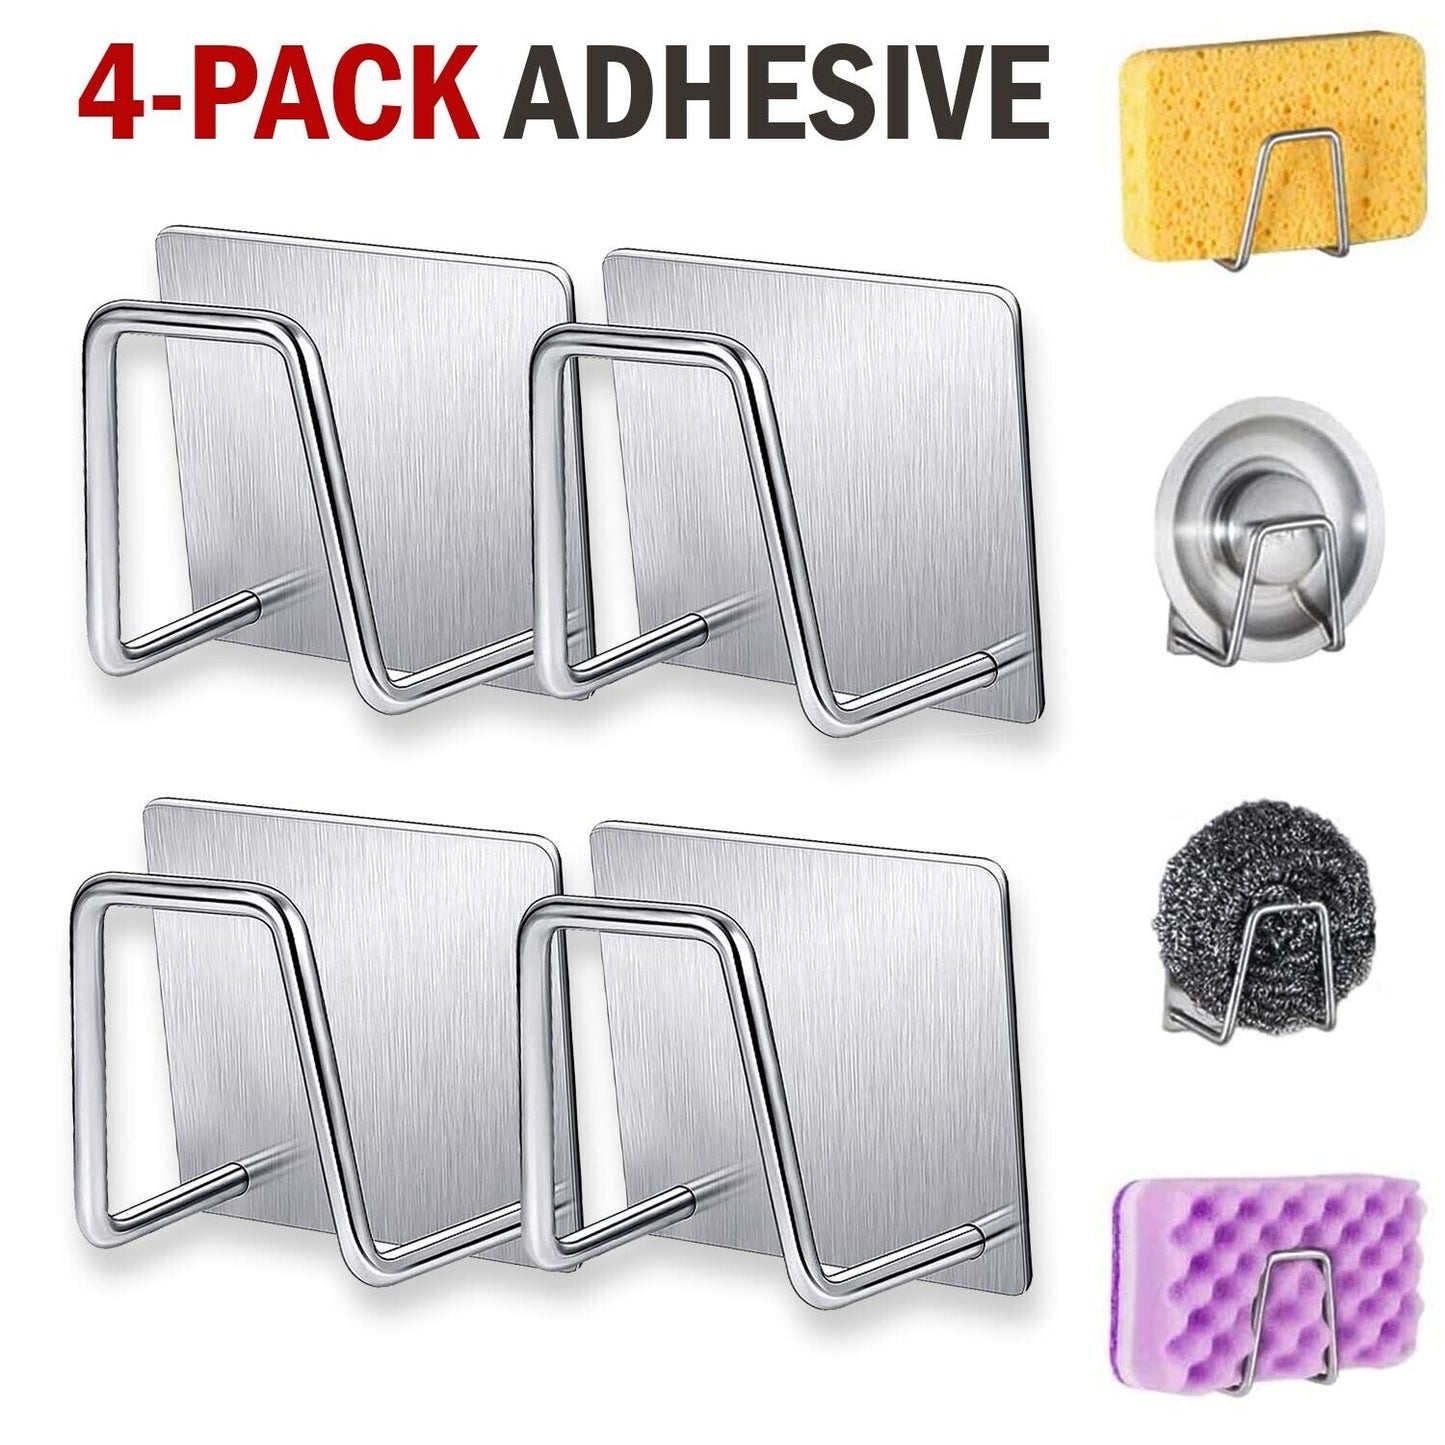 Set of 4 Adhesive Sponge Holders Sink Caddies for Kitchen Accessories in Stainless Steel